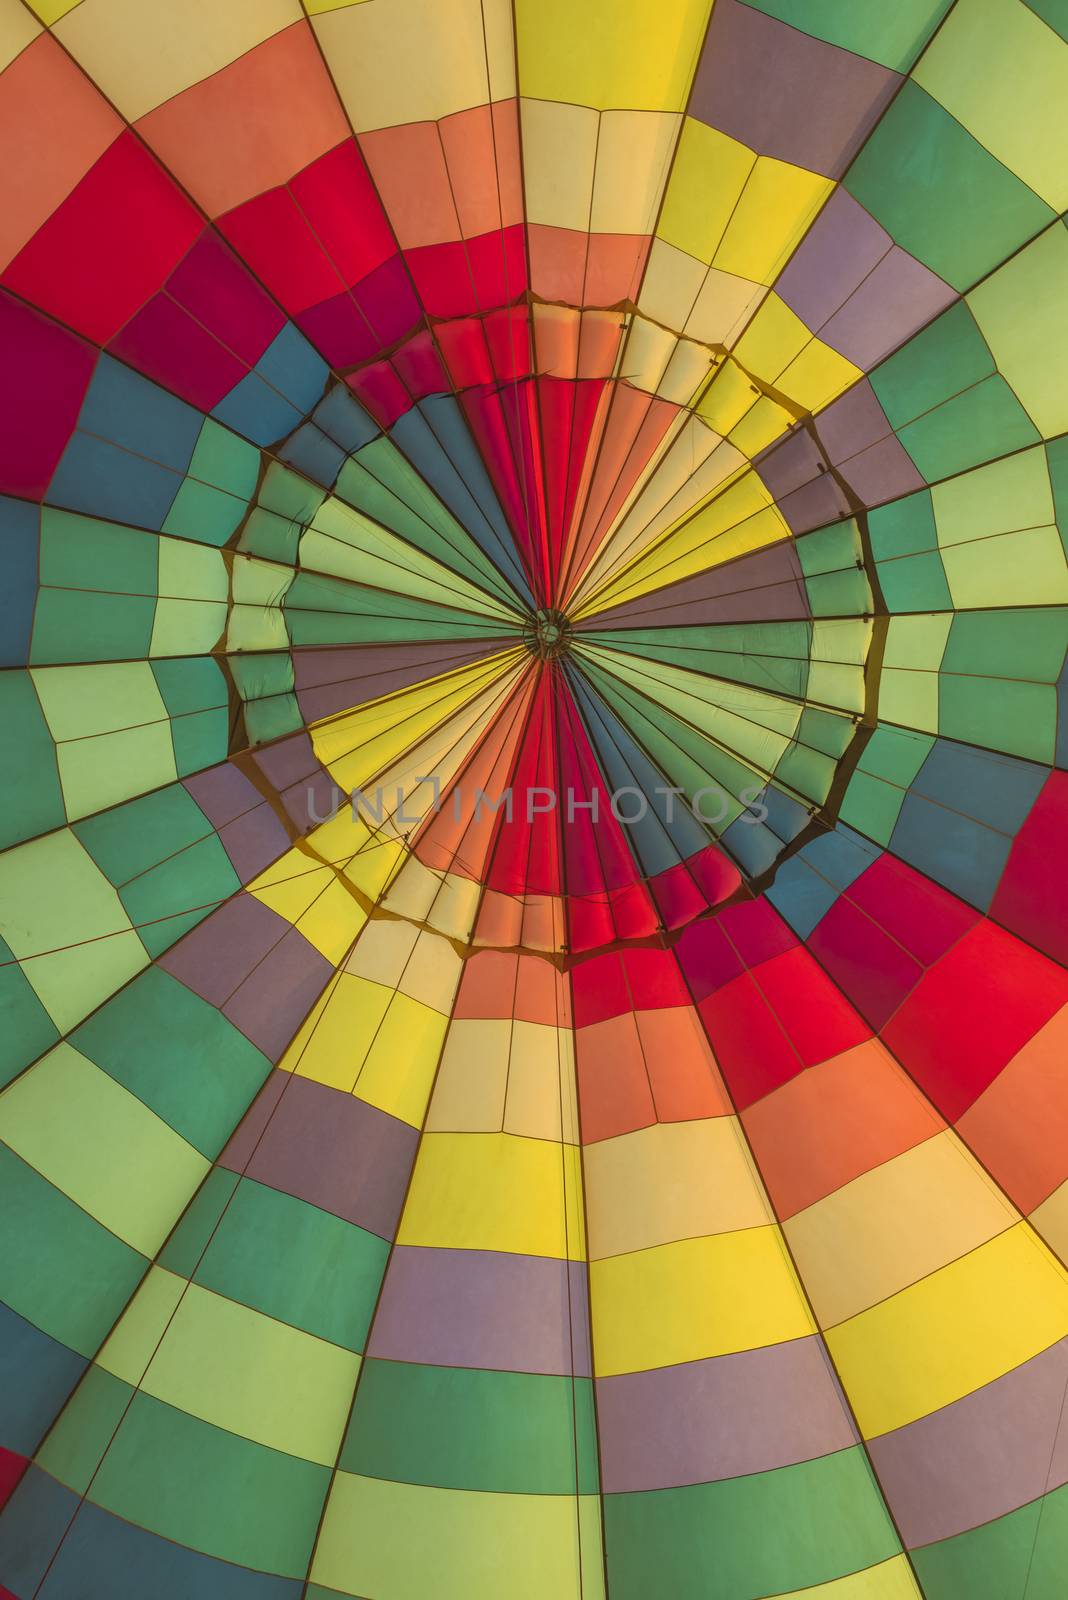 Multi-colored interior a hot air balloon giving abstract background wallpaper